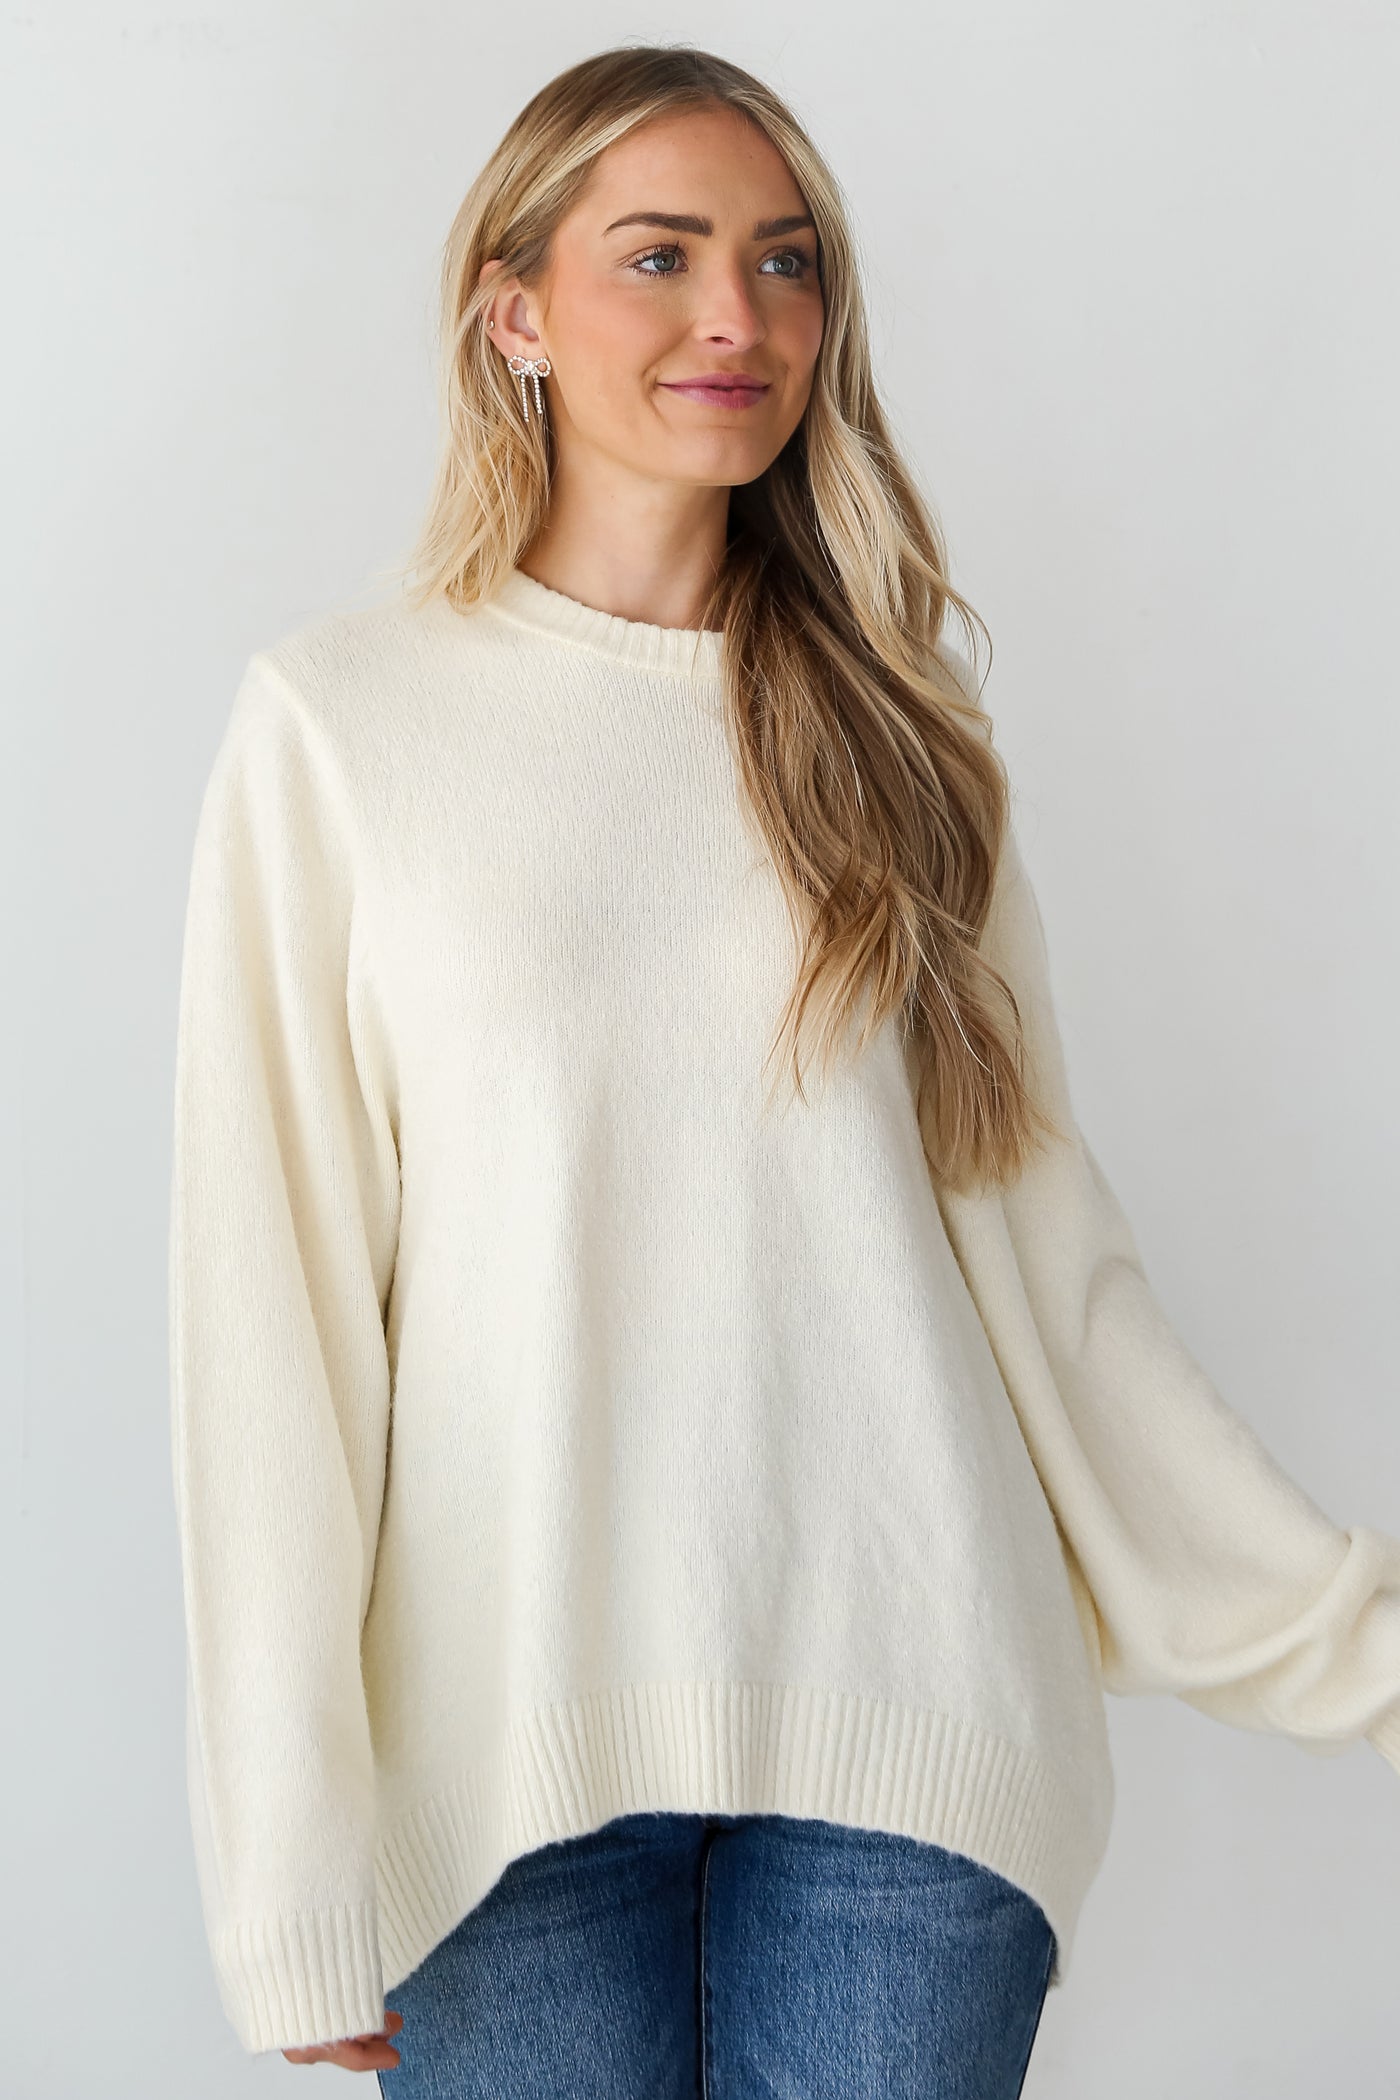 cream Oversized Sweater front view